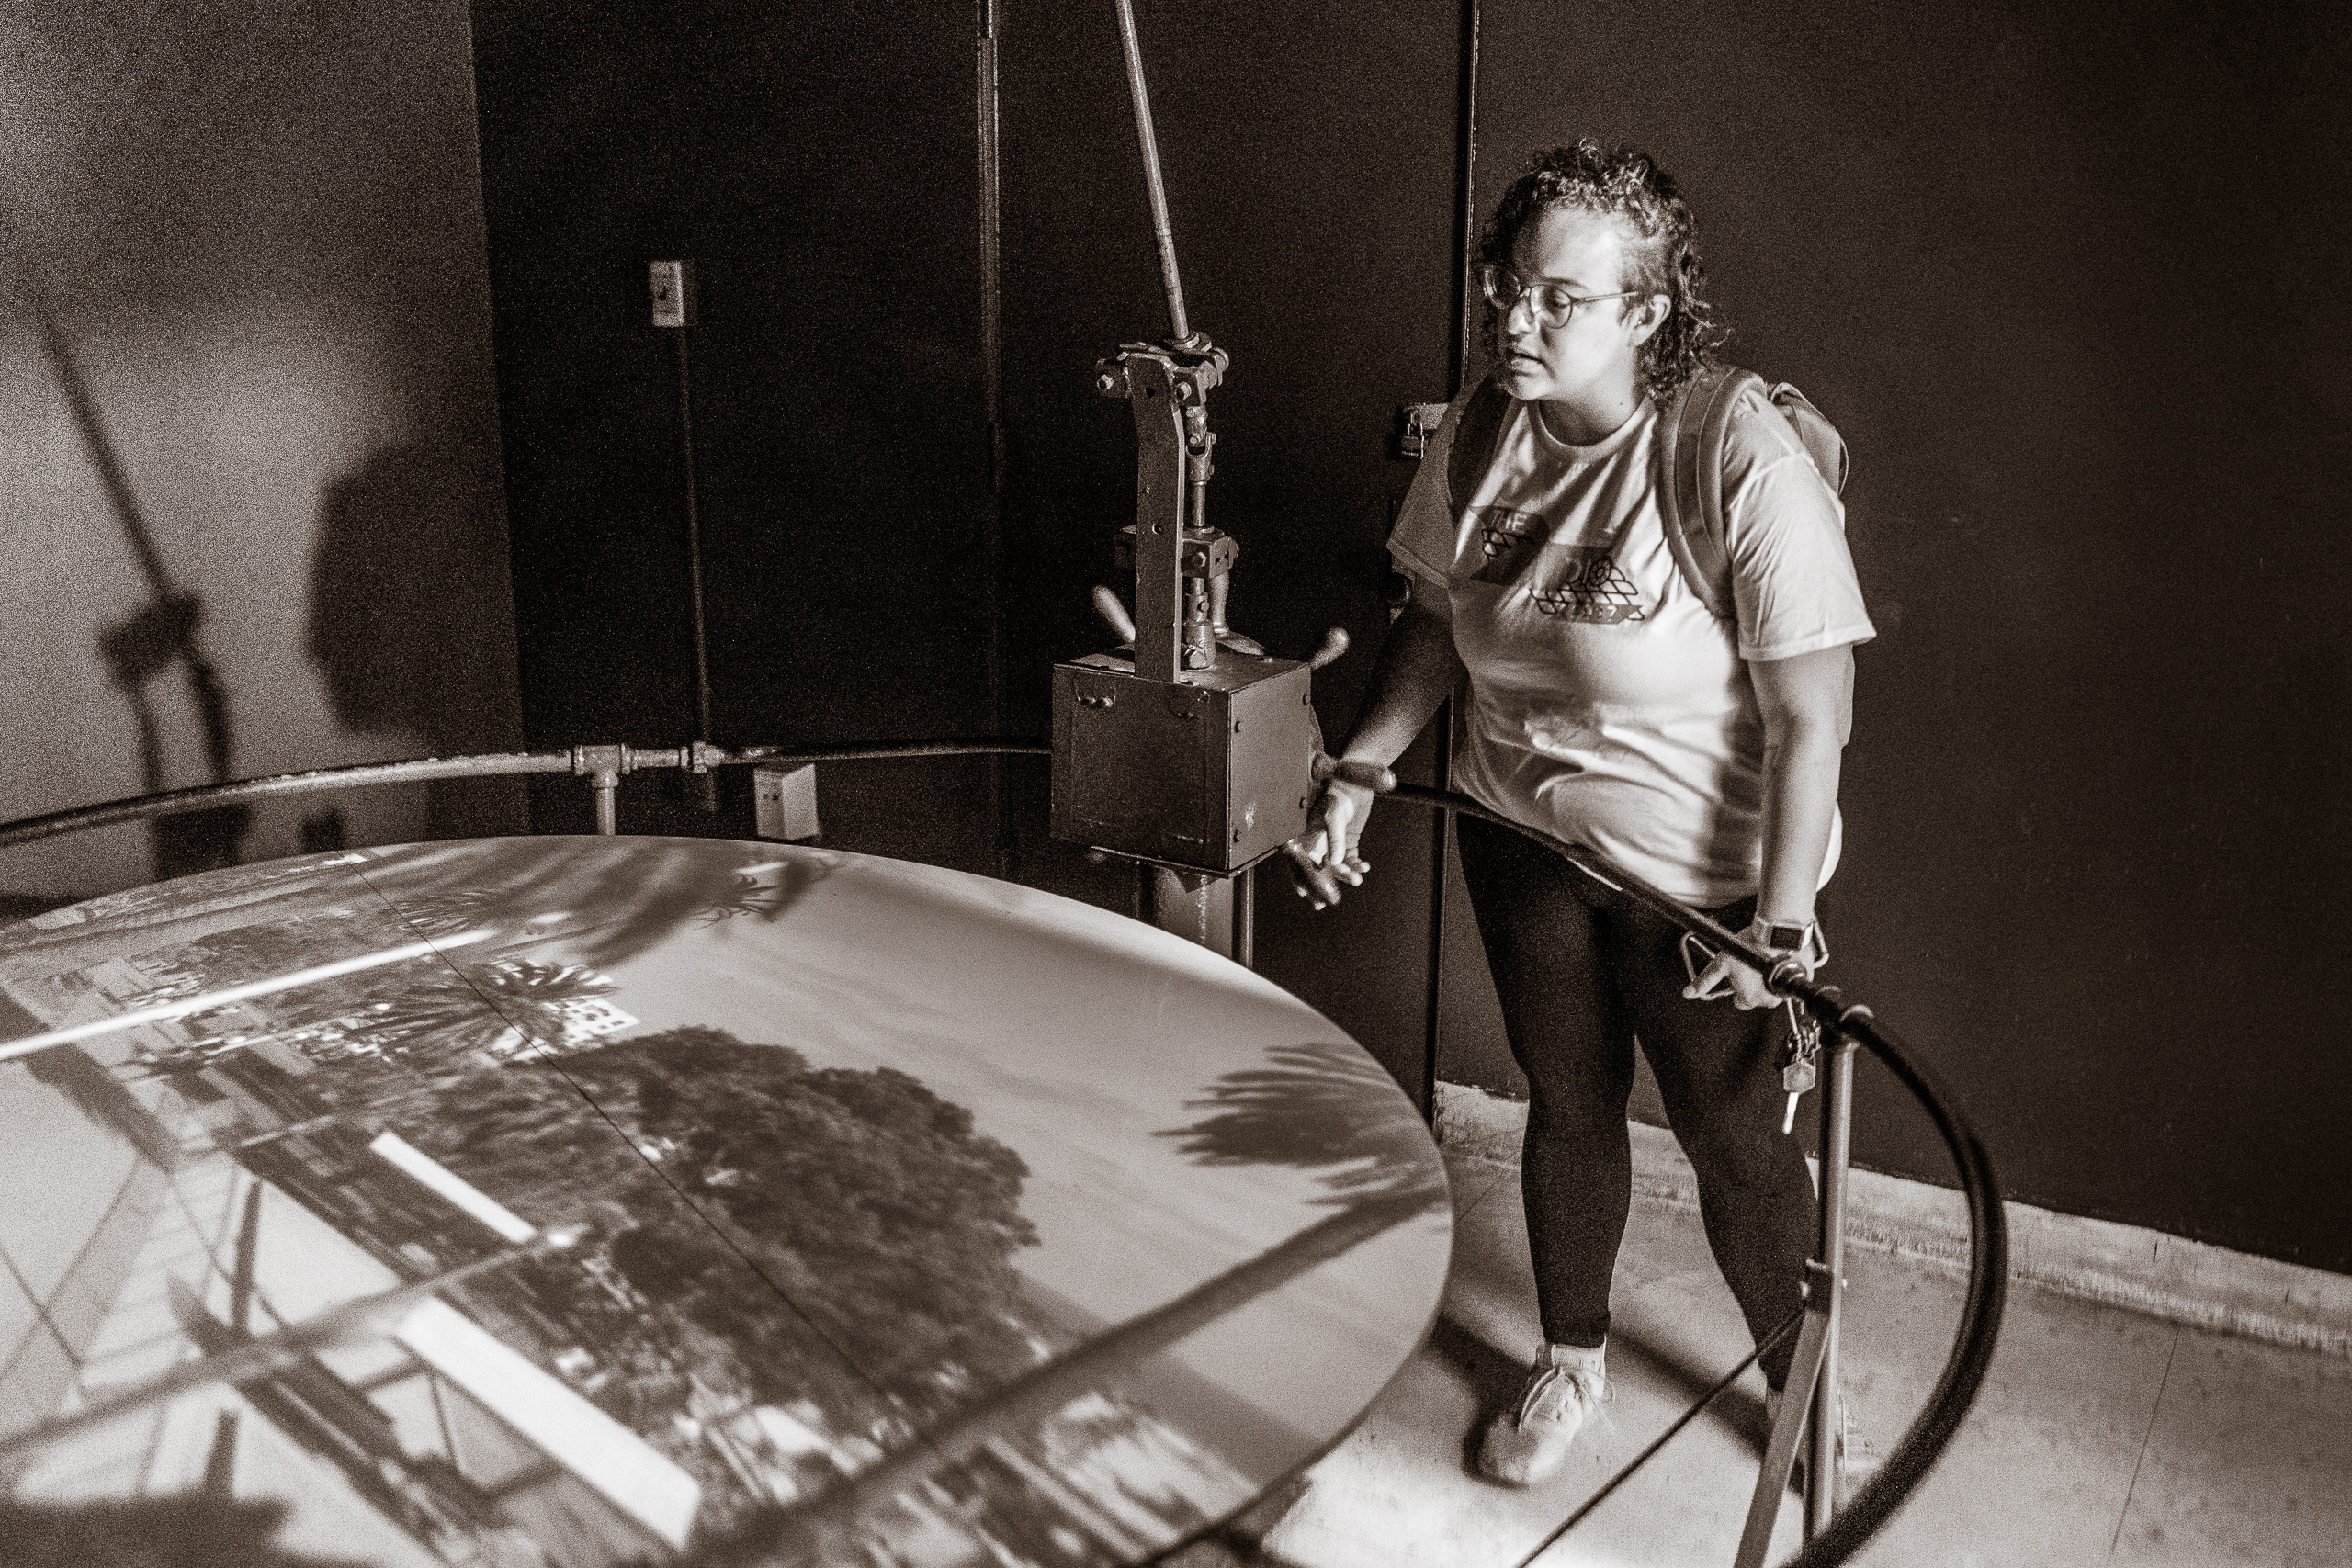 Santa Monica, CA Camera Obscura Art Lab artist-in-residence Brittany Ransom turns a wheel in the camera obscura room and views the resulting projection on the surface of a large, white table